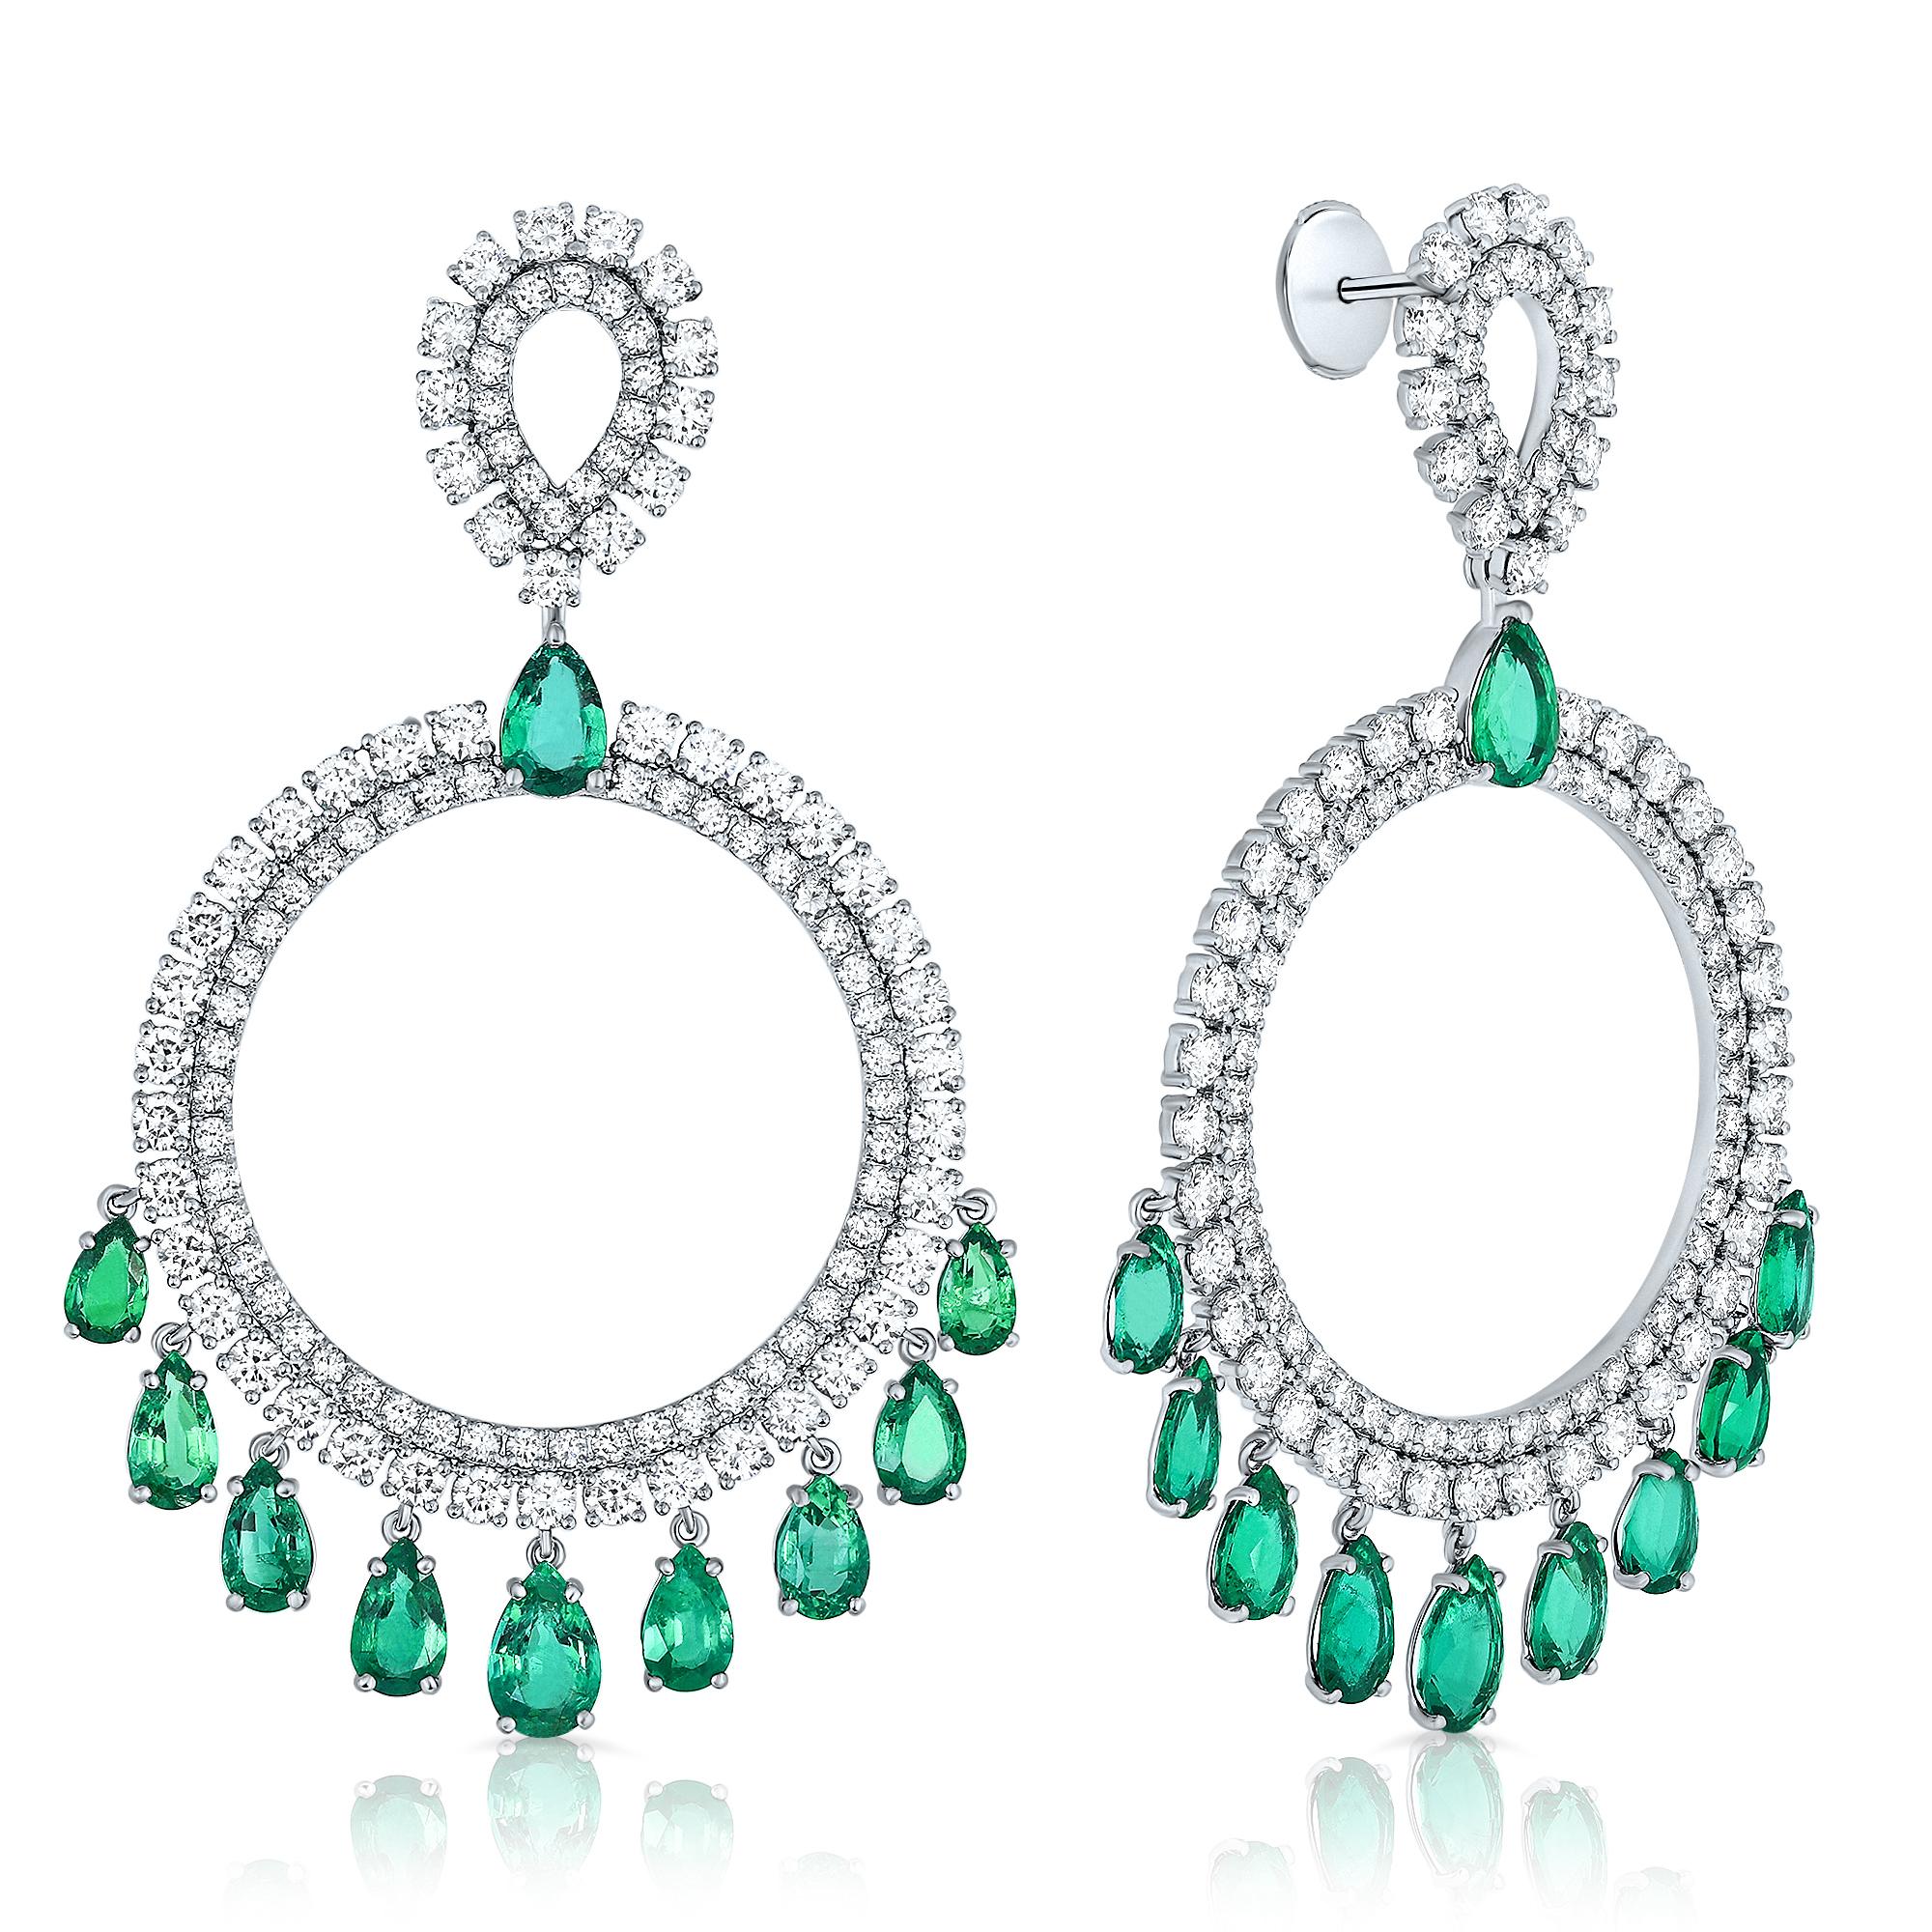 Contemporary 17.59 Carat White Diamond and Emerald Chandelier Drop Earring set in 18k Gold. For Sale